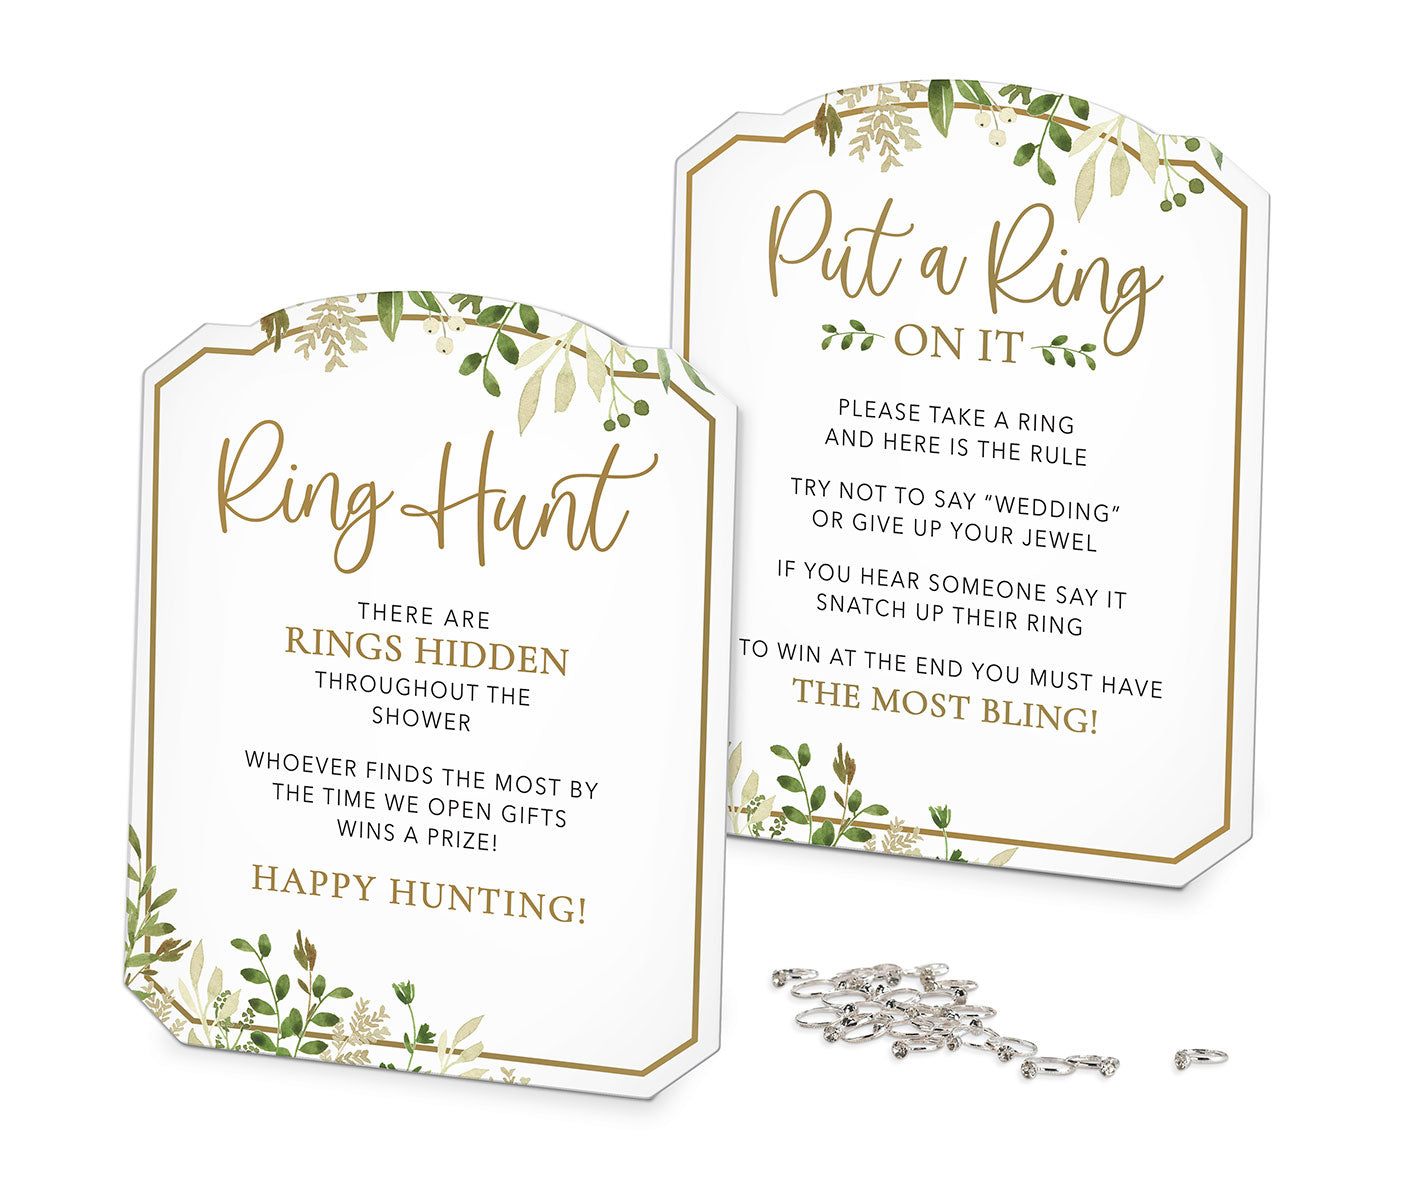 Put a Ring on It and Ring Hunt Bridal Shower Games (25 rings)